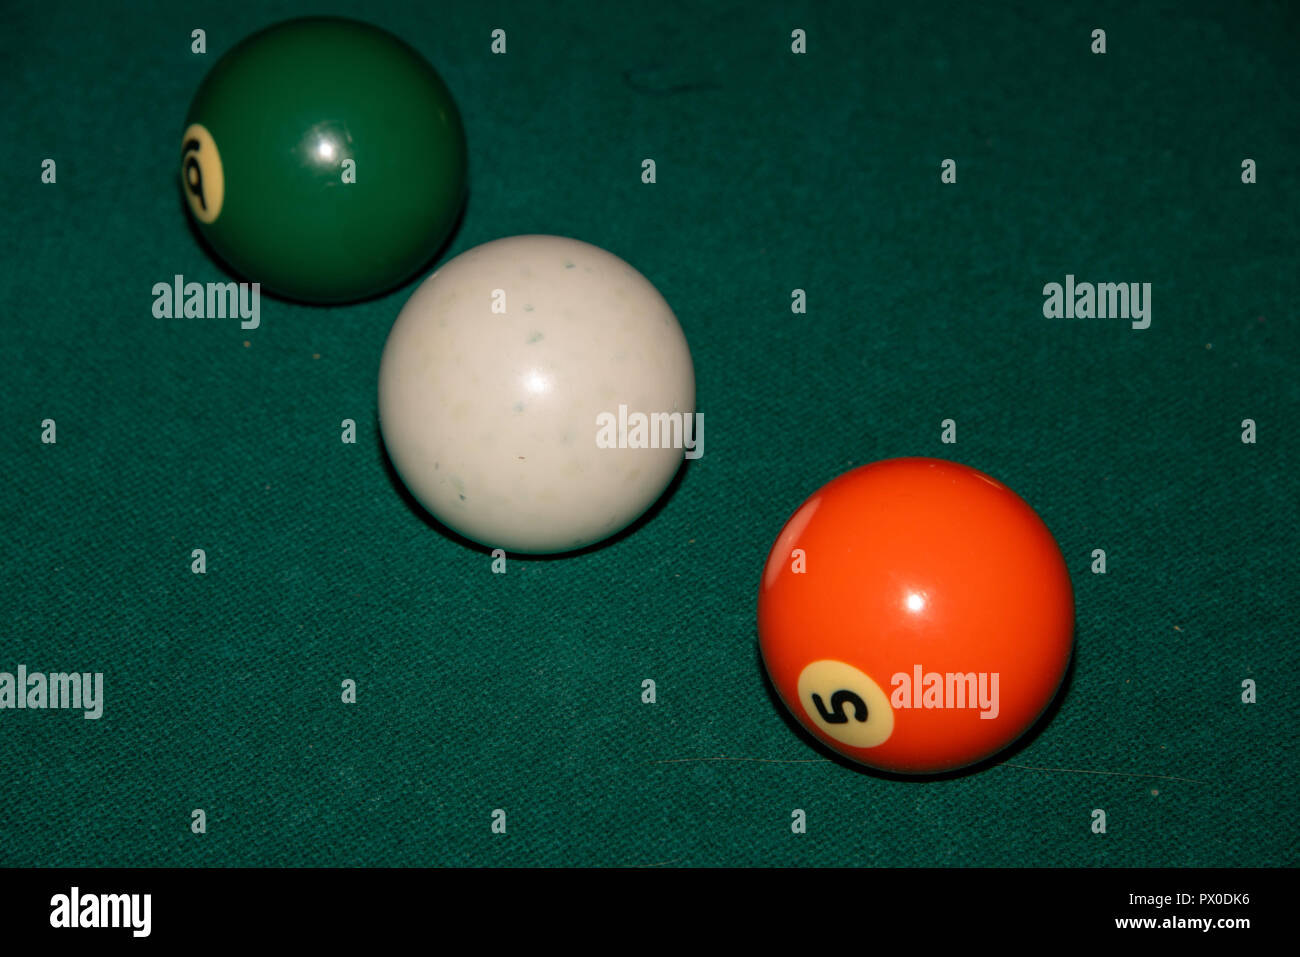 Page 7 - Game Of 8 Ball Pool High Resolution Stock Photography and Images -  Alamy